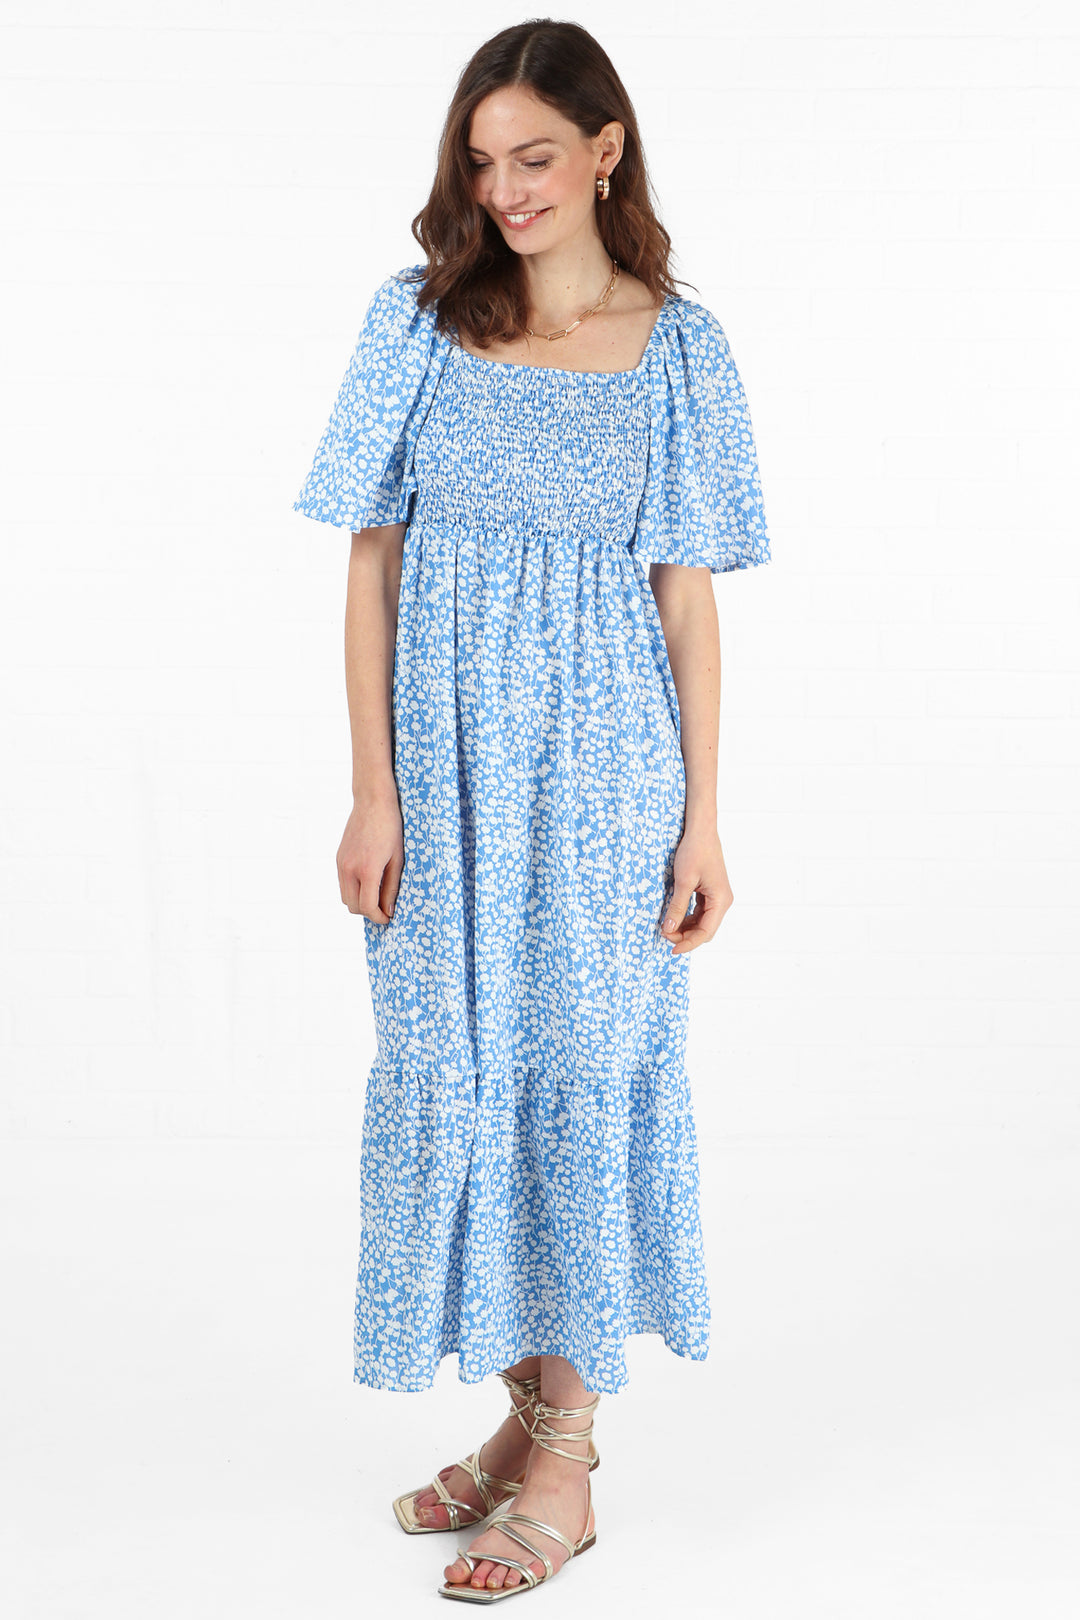 model wearing a blue and white ditsy floral pattern maxi milkmaid dress with short bell sleeves and a shirred bust